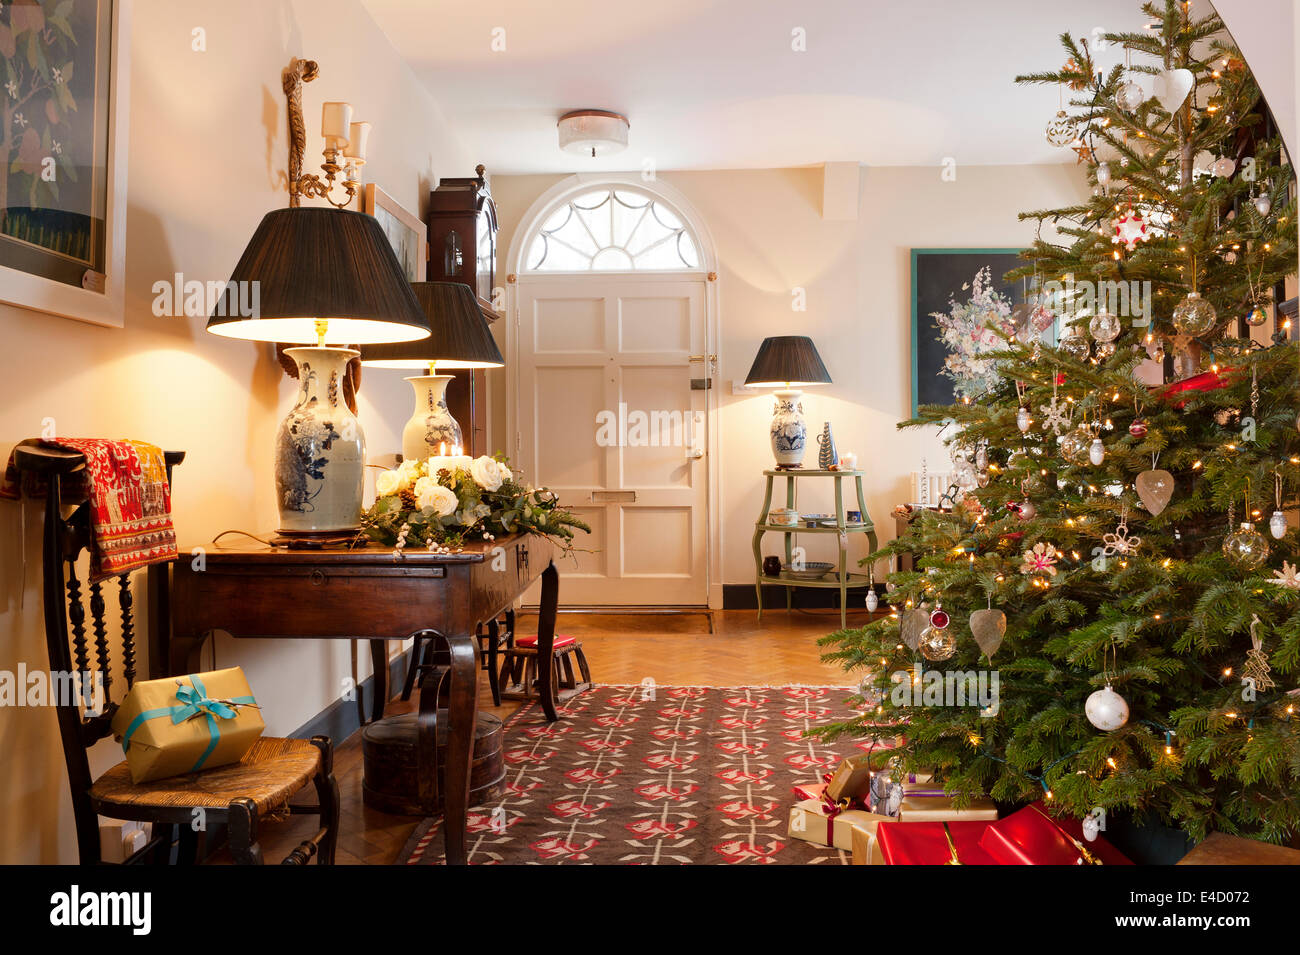 Christmas tree in entrance hall with early 20th century kilim. The hall table is French chestnut and the table lamps are antique Stock Photo